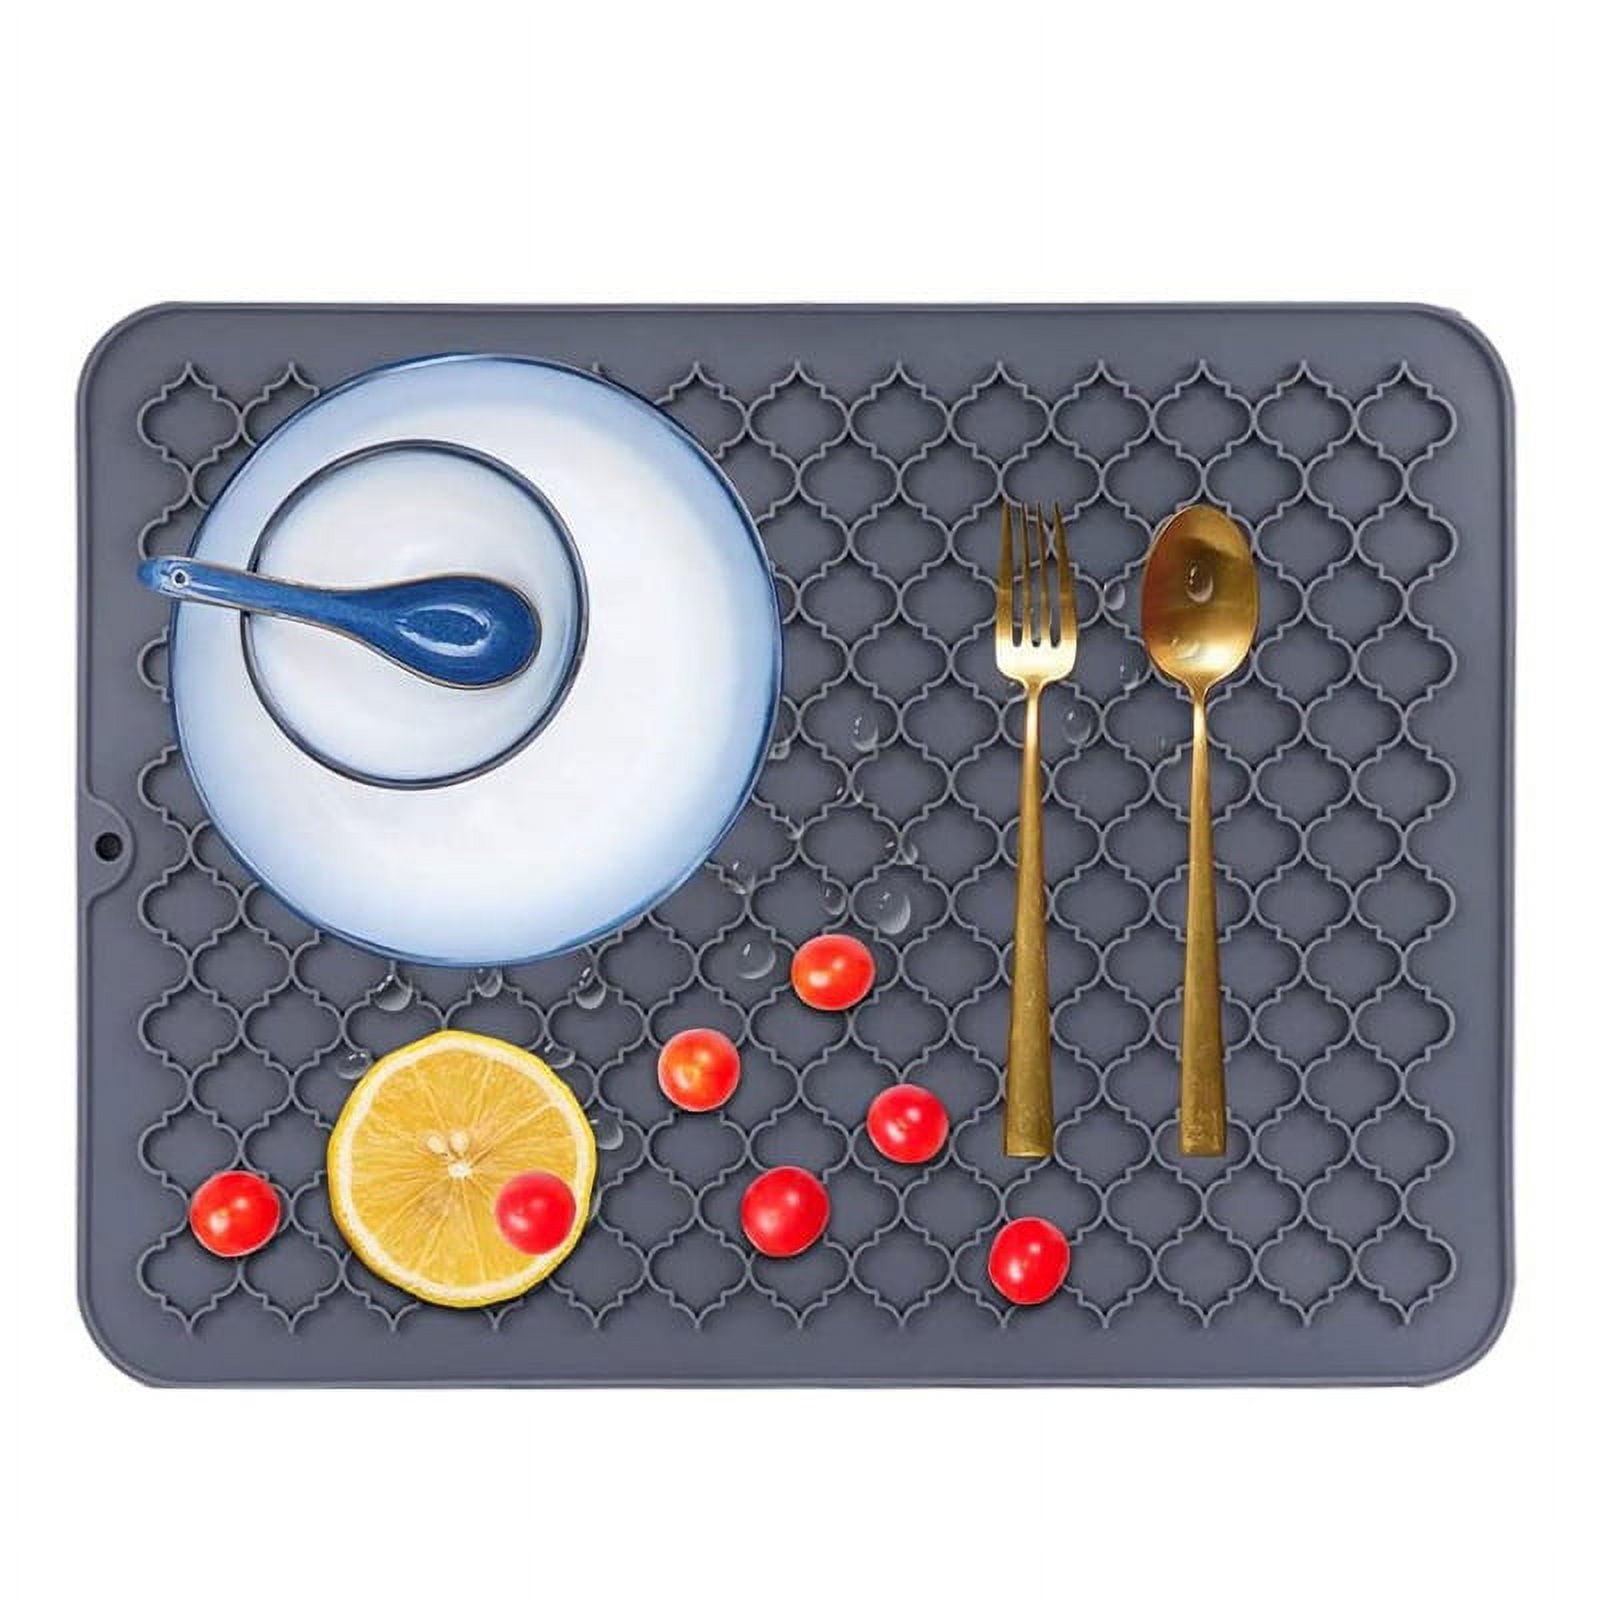 Silicone Patterned Draining Mat ,Dish Drying Mats for Kitchen